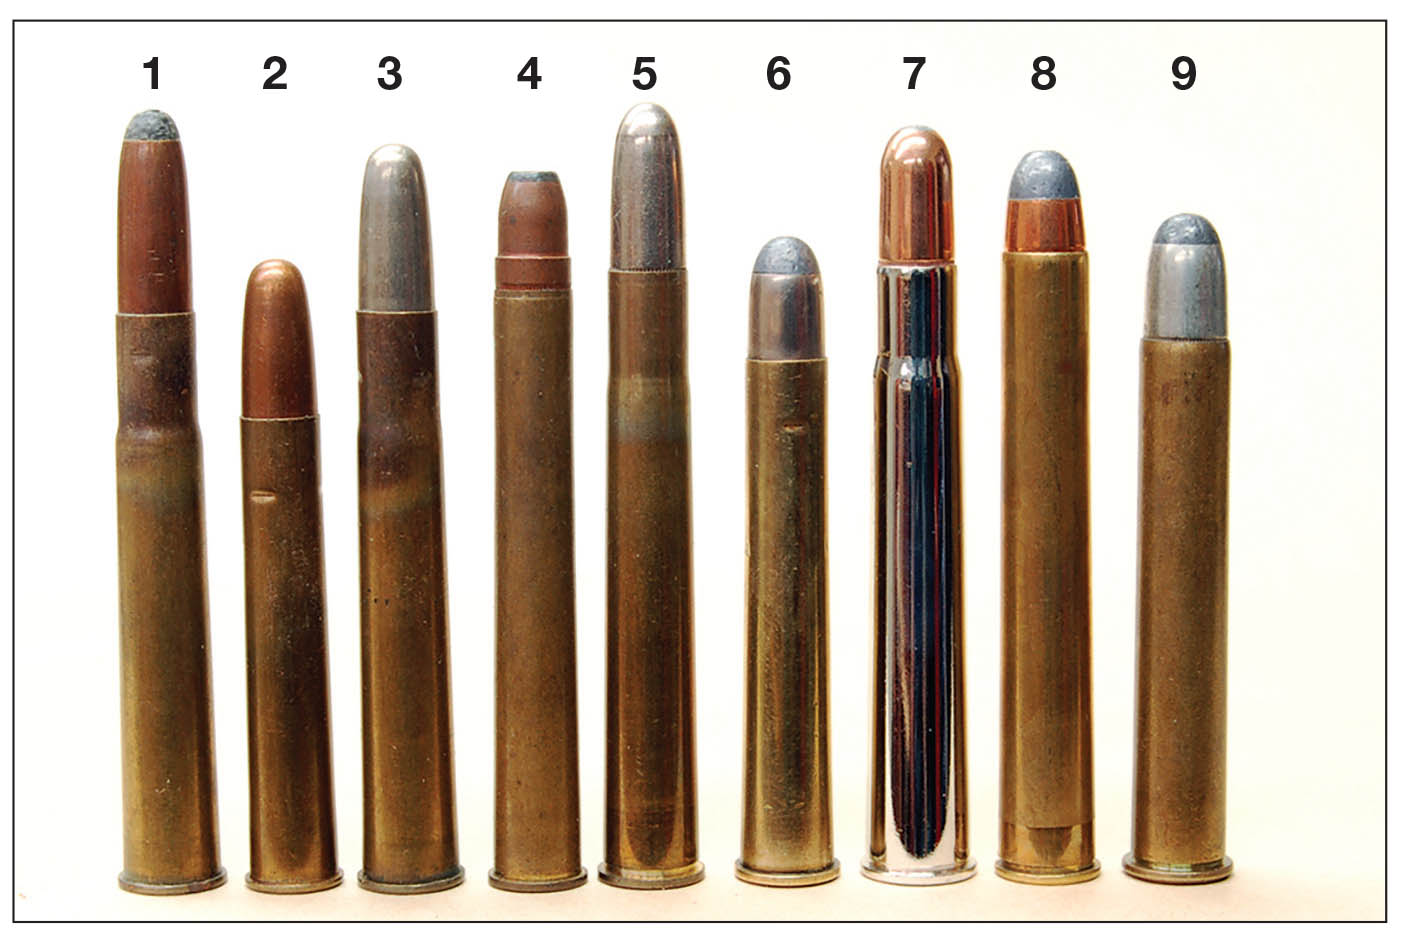 Early smokeless “medium bores” include the (1) .400/.350 Rigby, (2) .360 Nitro Express, (3) .400/.360 NE, (4) 9.3x72R, (5) 9.3x74R, (6) .375 (21⁄2) , (7) .375 H&H flanged, (8) .400 (3-inch) and the (9) .405 Winchester.